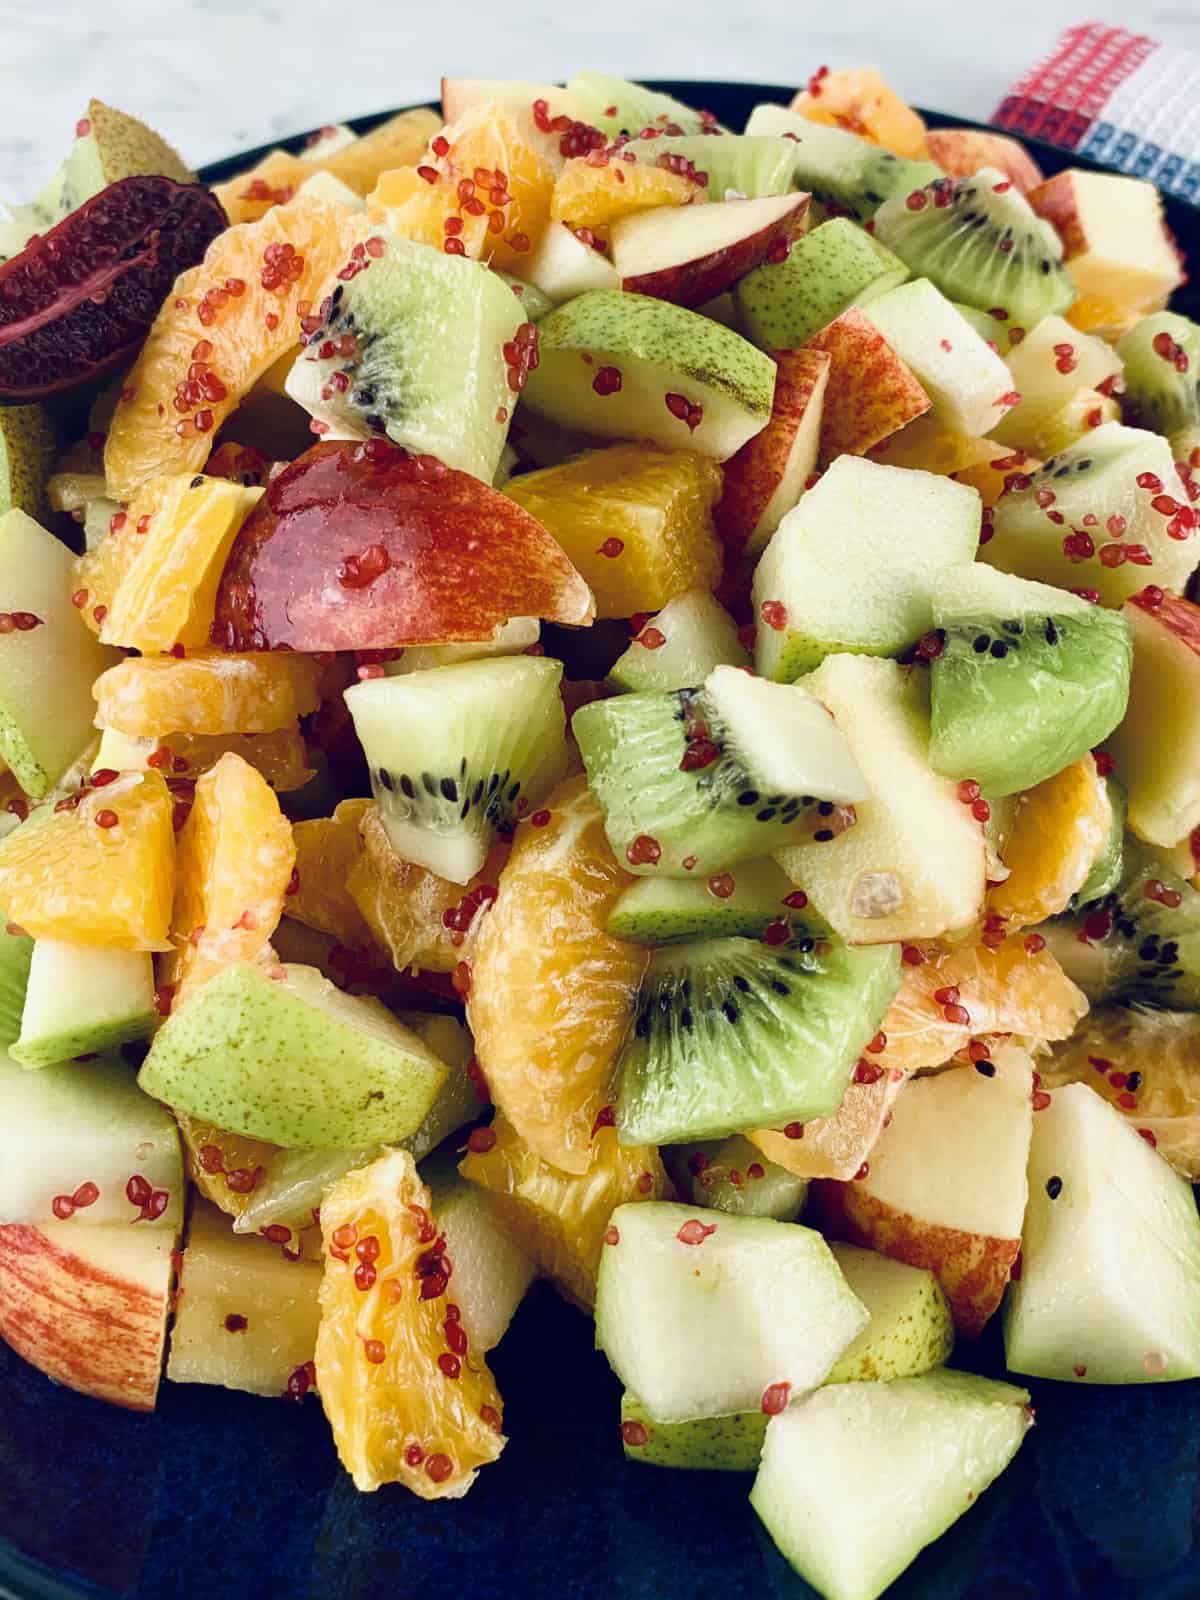 A closeup of Autumn fruit salad on a black plate on top of a checked tea towel.